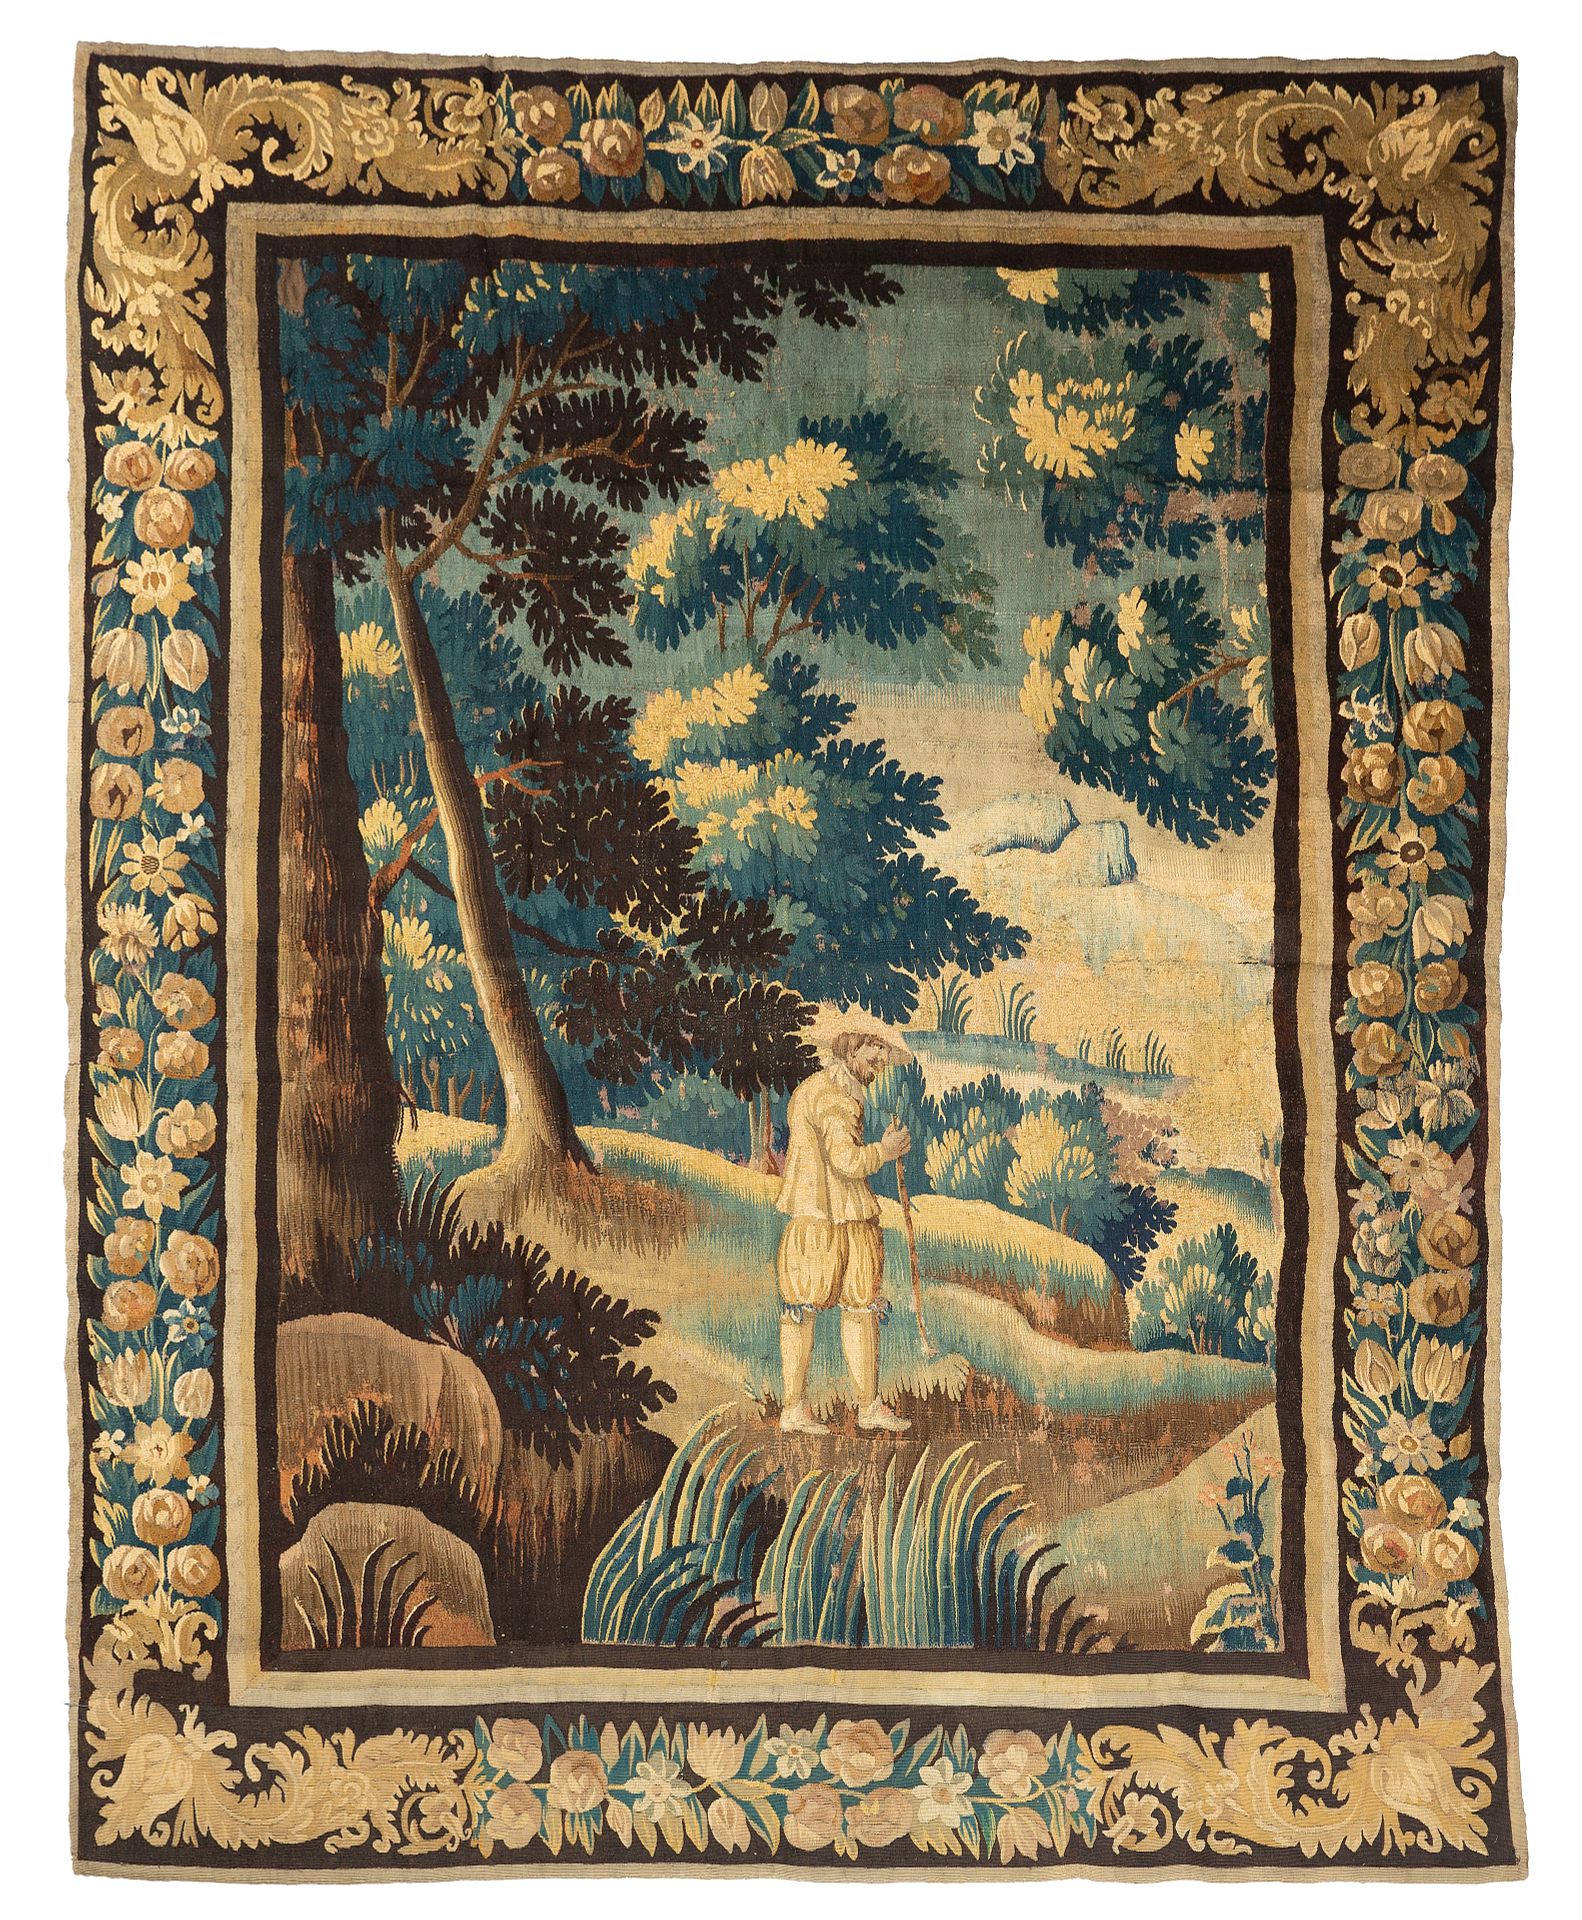 Null Aubusson tapestry, from the end of the 17th century

Technical characterist&hellip;